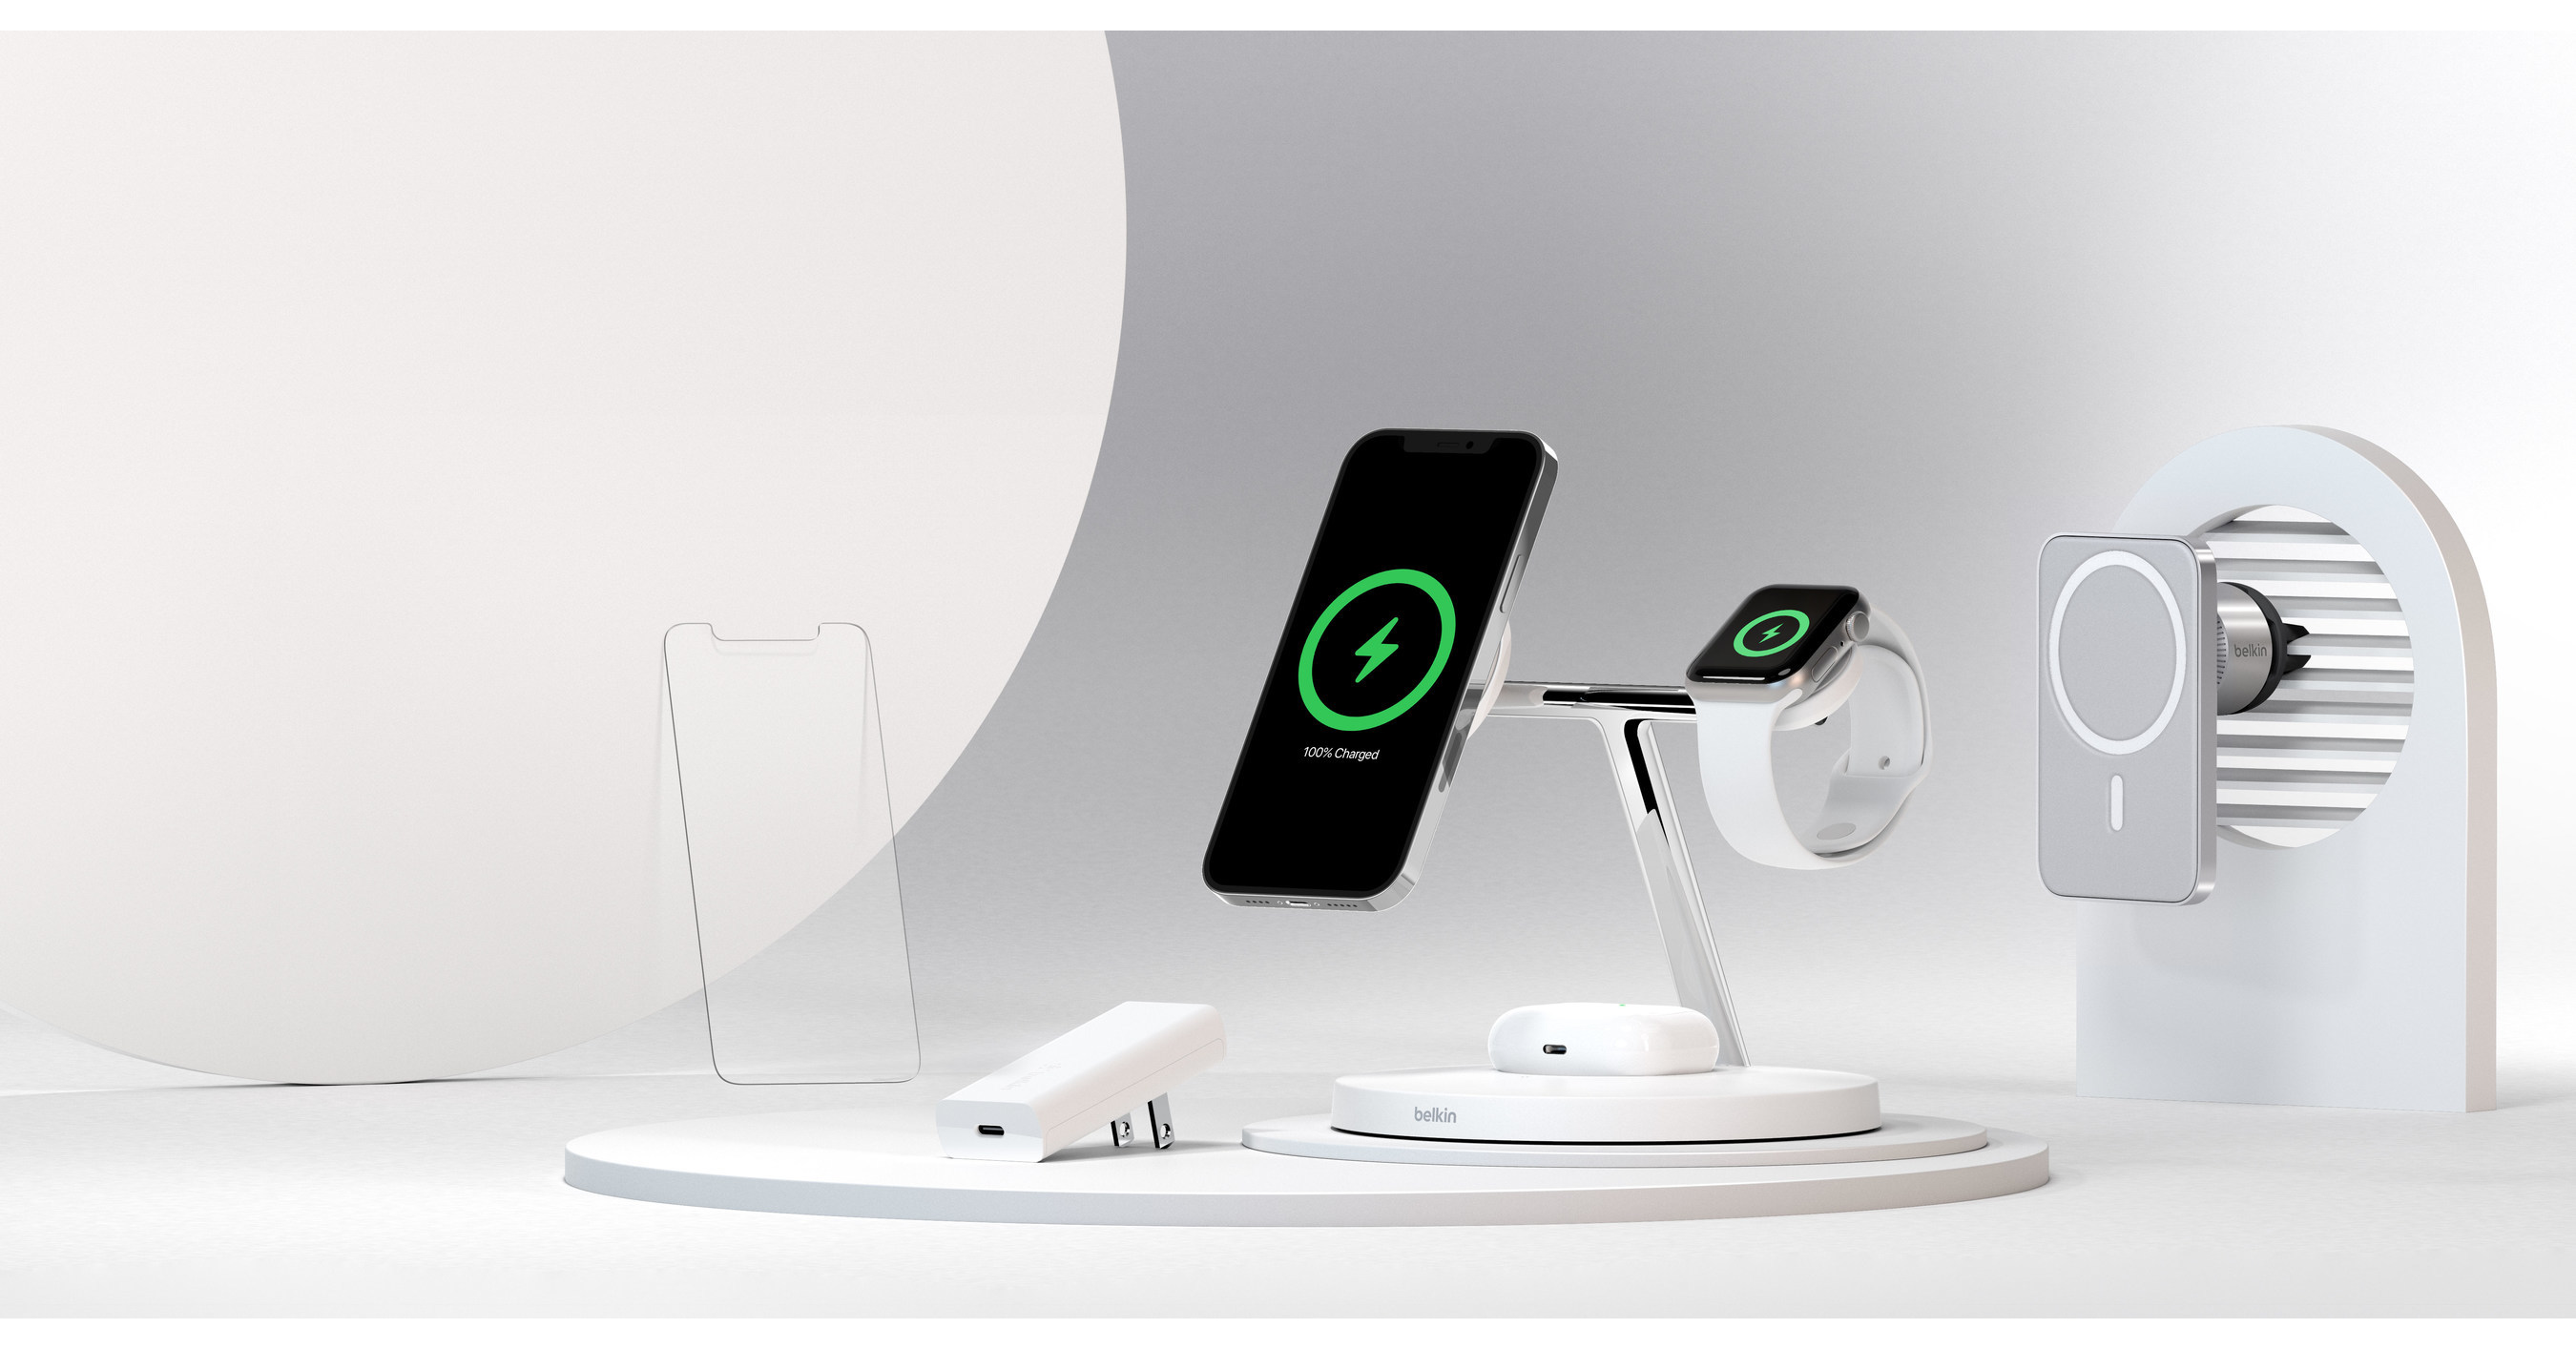 Belkin Introduces Its Most Powerful Mobile Accessories Optimized for iPhone  12 Models